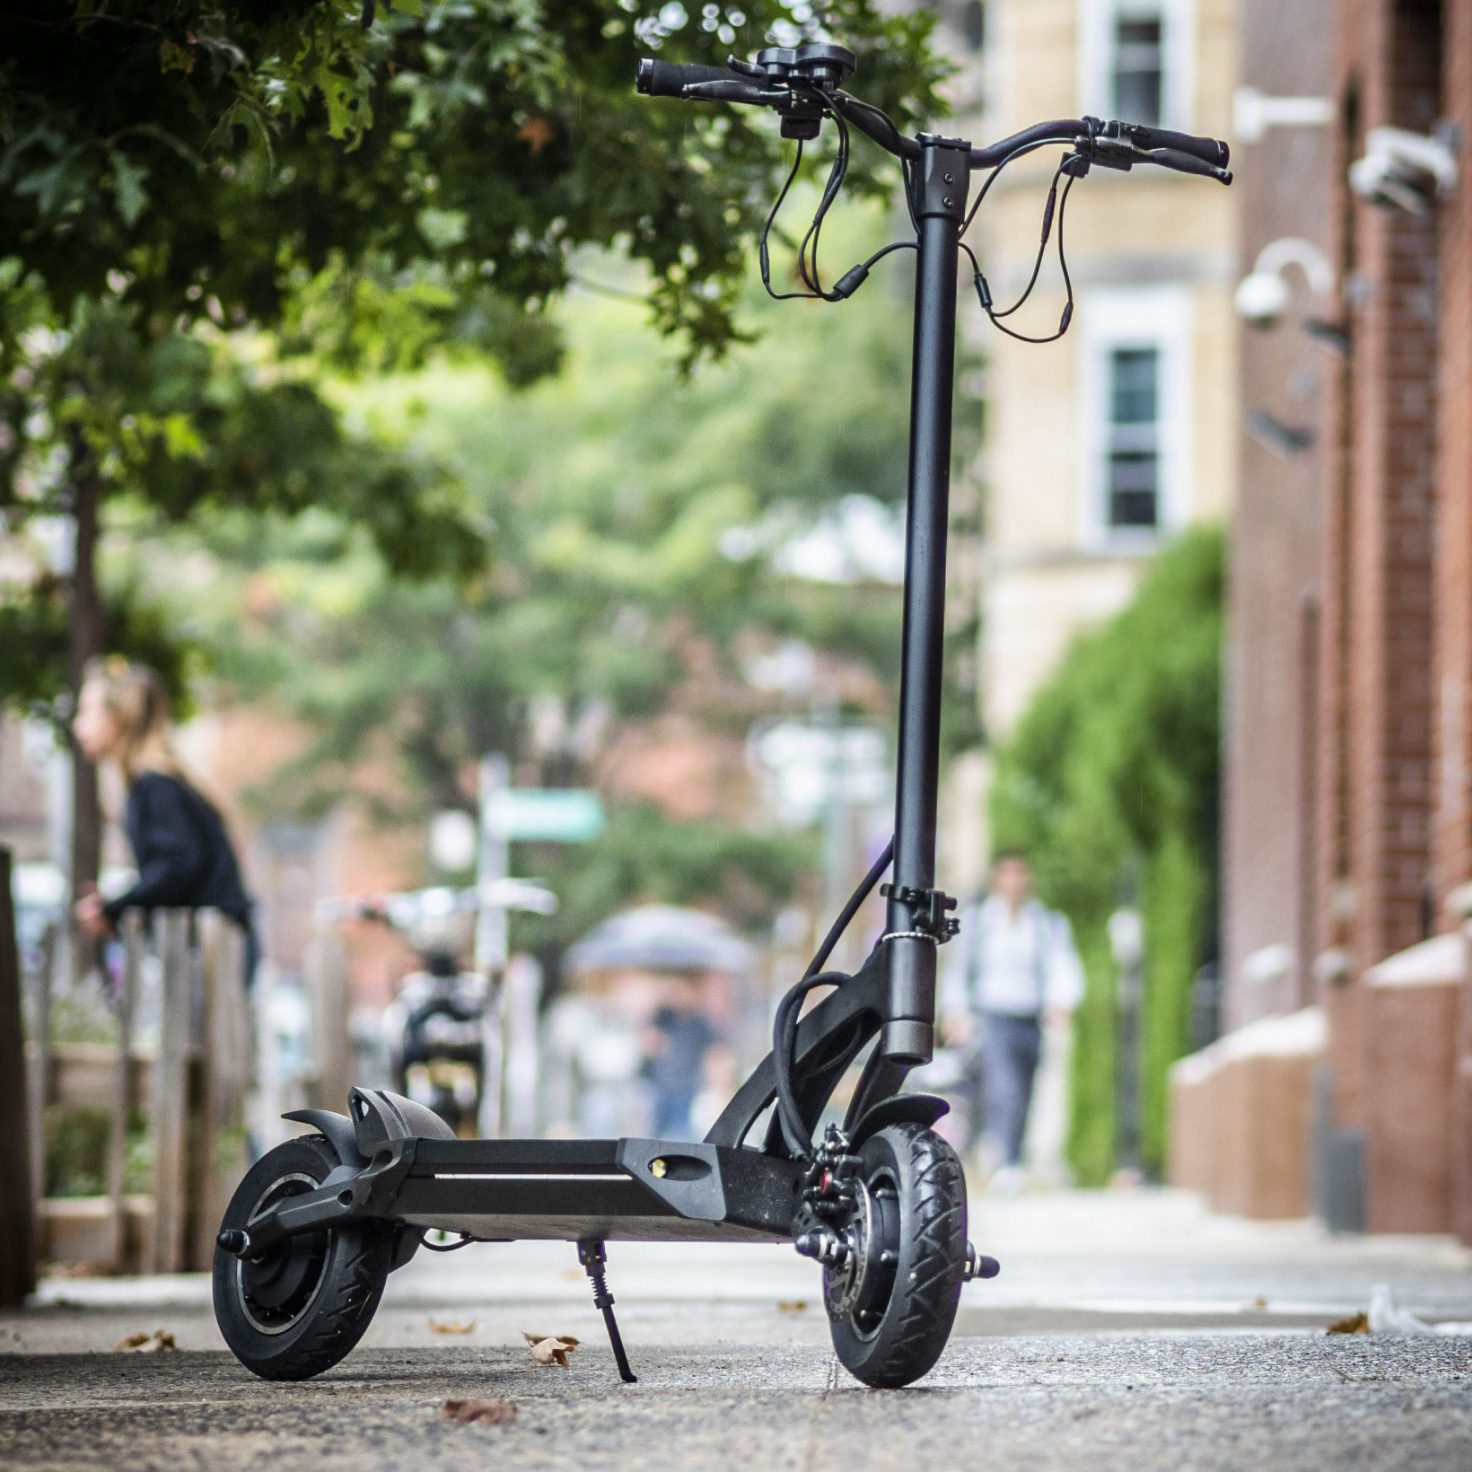 Review: FluidFreeRide’s Mantis is a 40 mph e-scooter that feels as safe ...